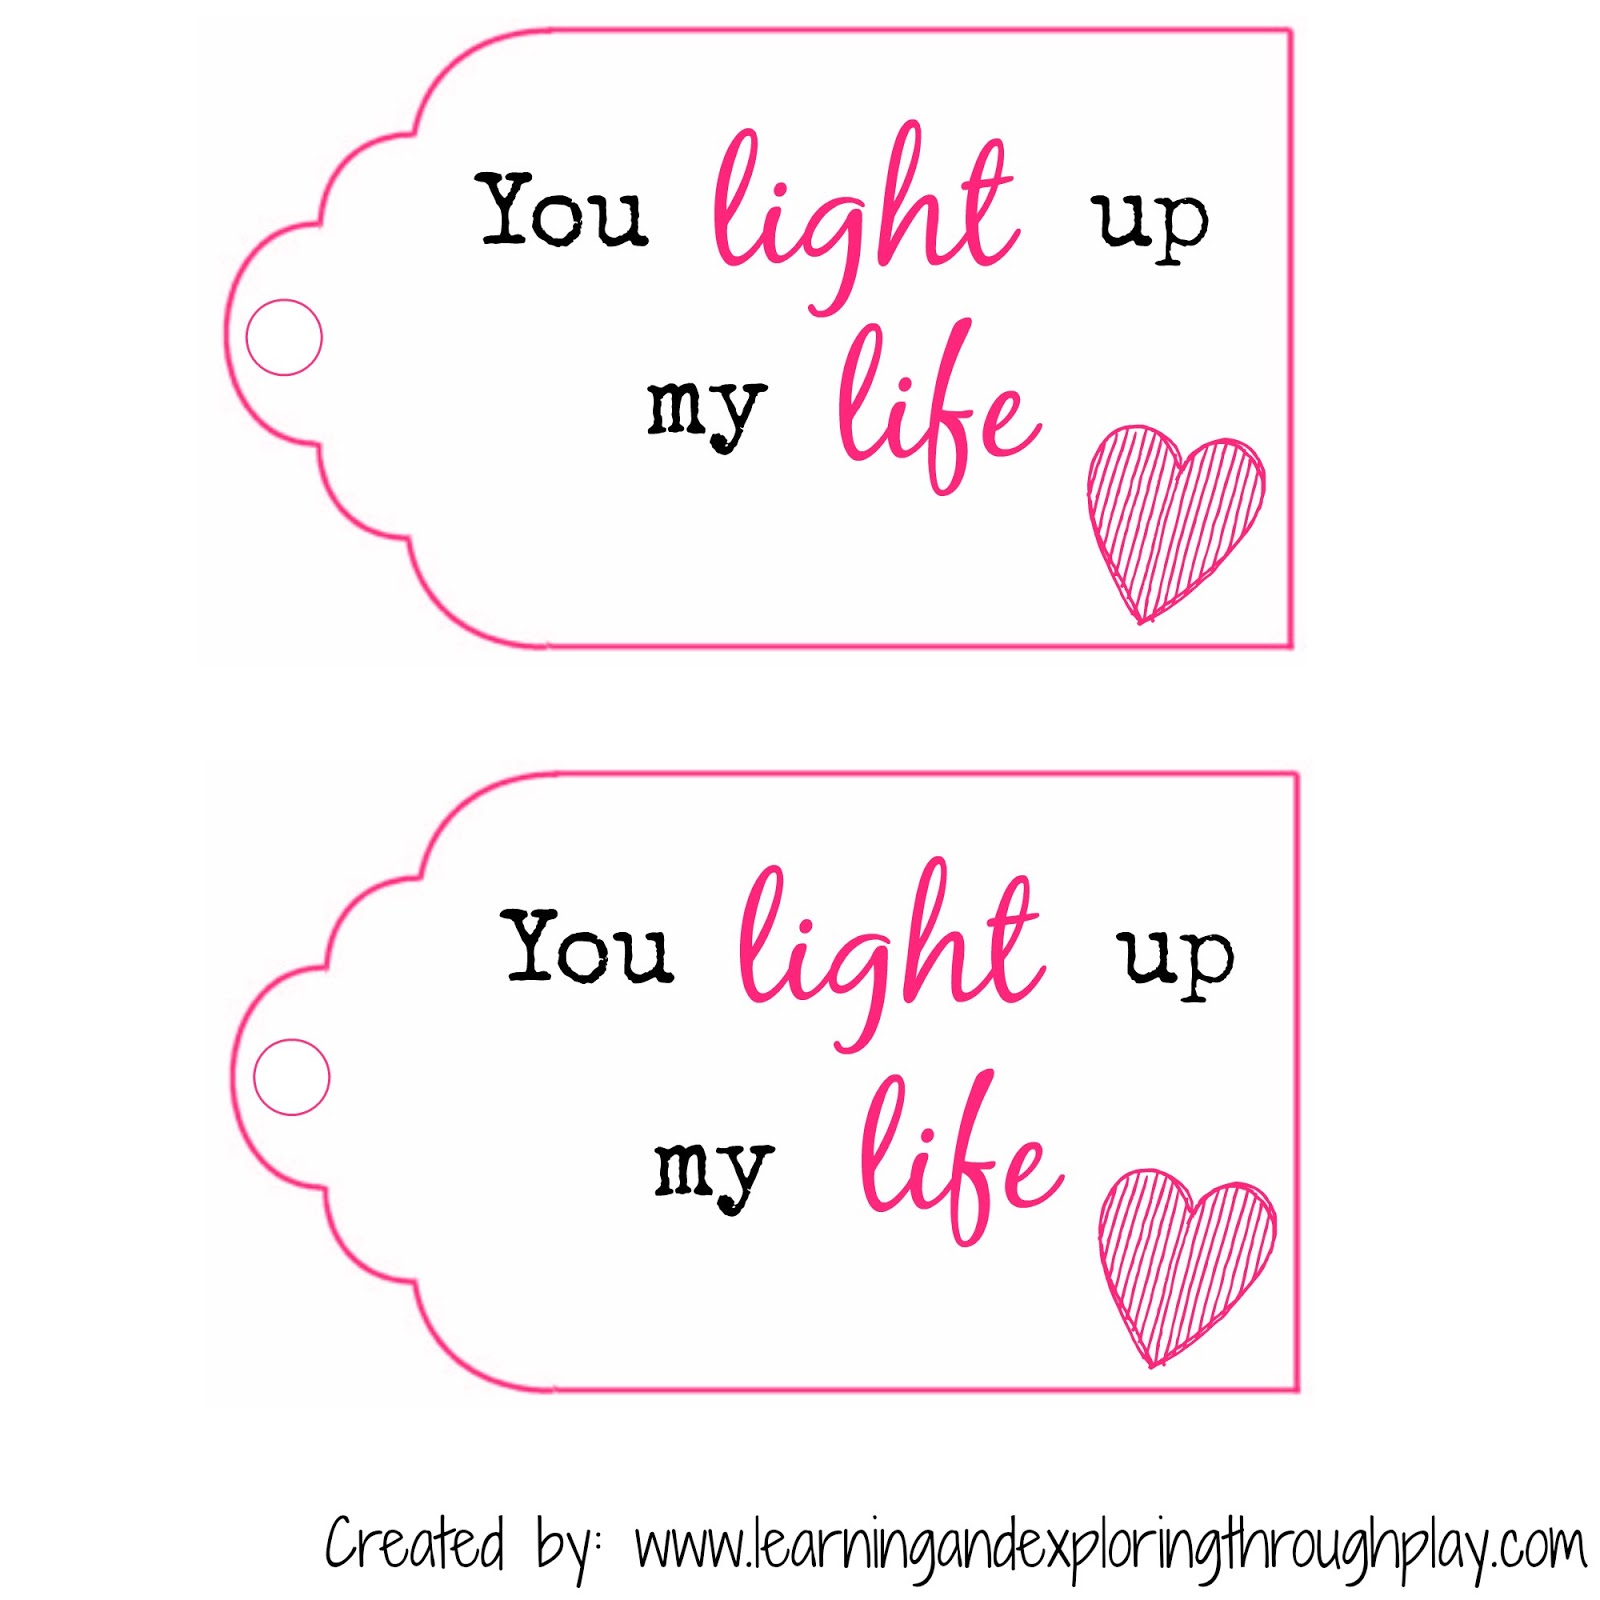 learning-and-exploring-through-play-you-light-up-my-life-valentines